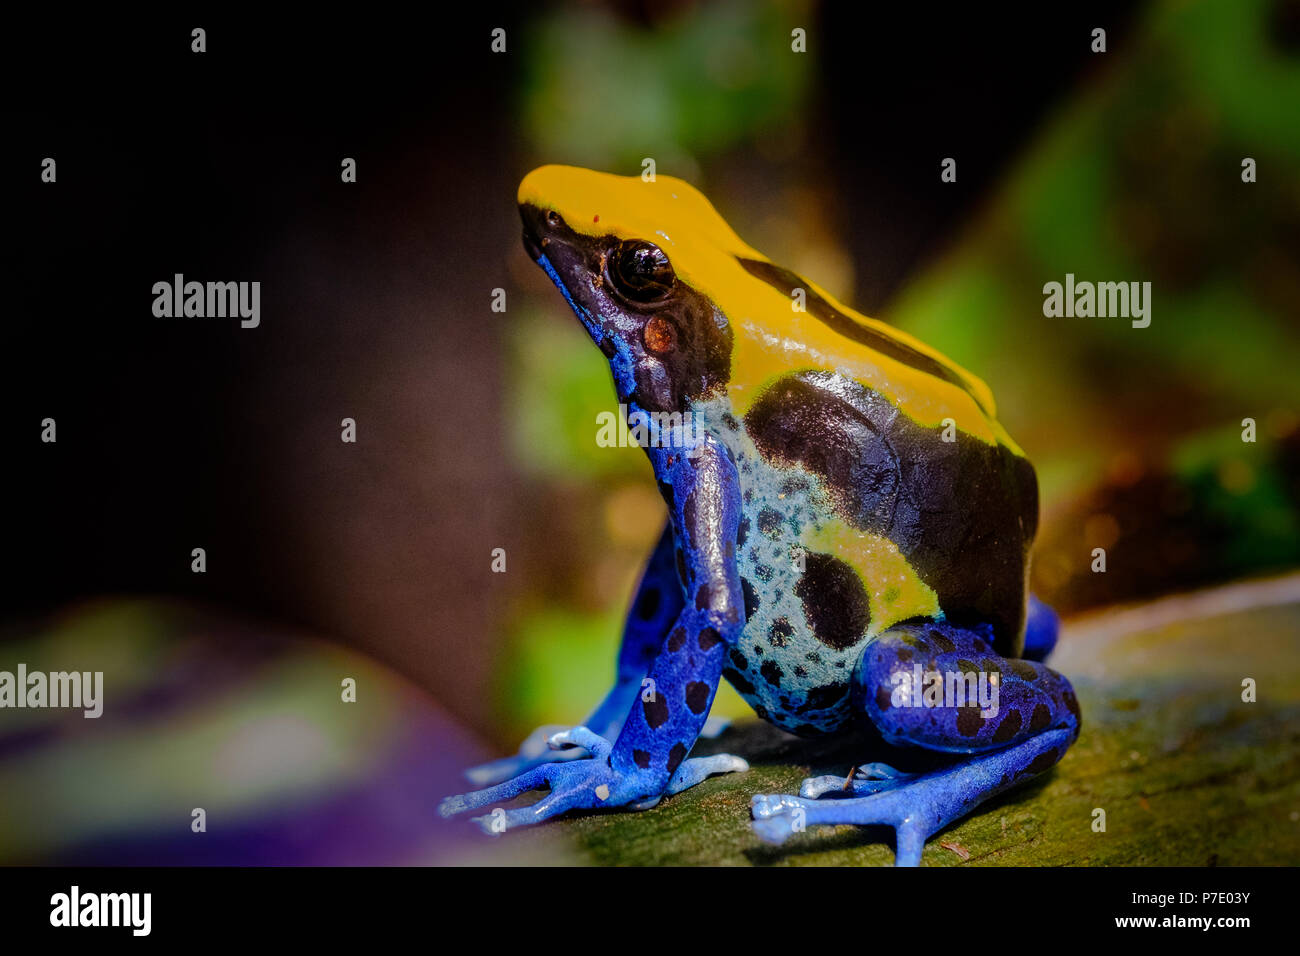 The dyeing dart frog, tinc (a nickname given by those in the hobby of keeping dart frogs), or dyeing poison frog (Dendrobates tinctorius) is a species Stock Photo